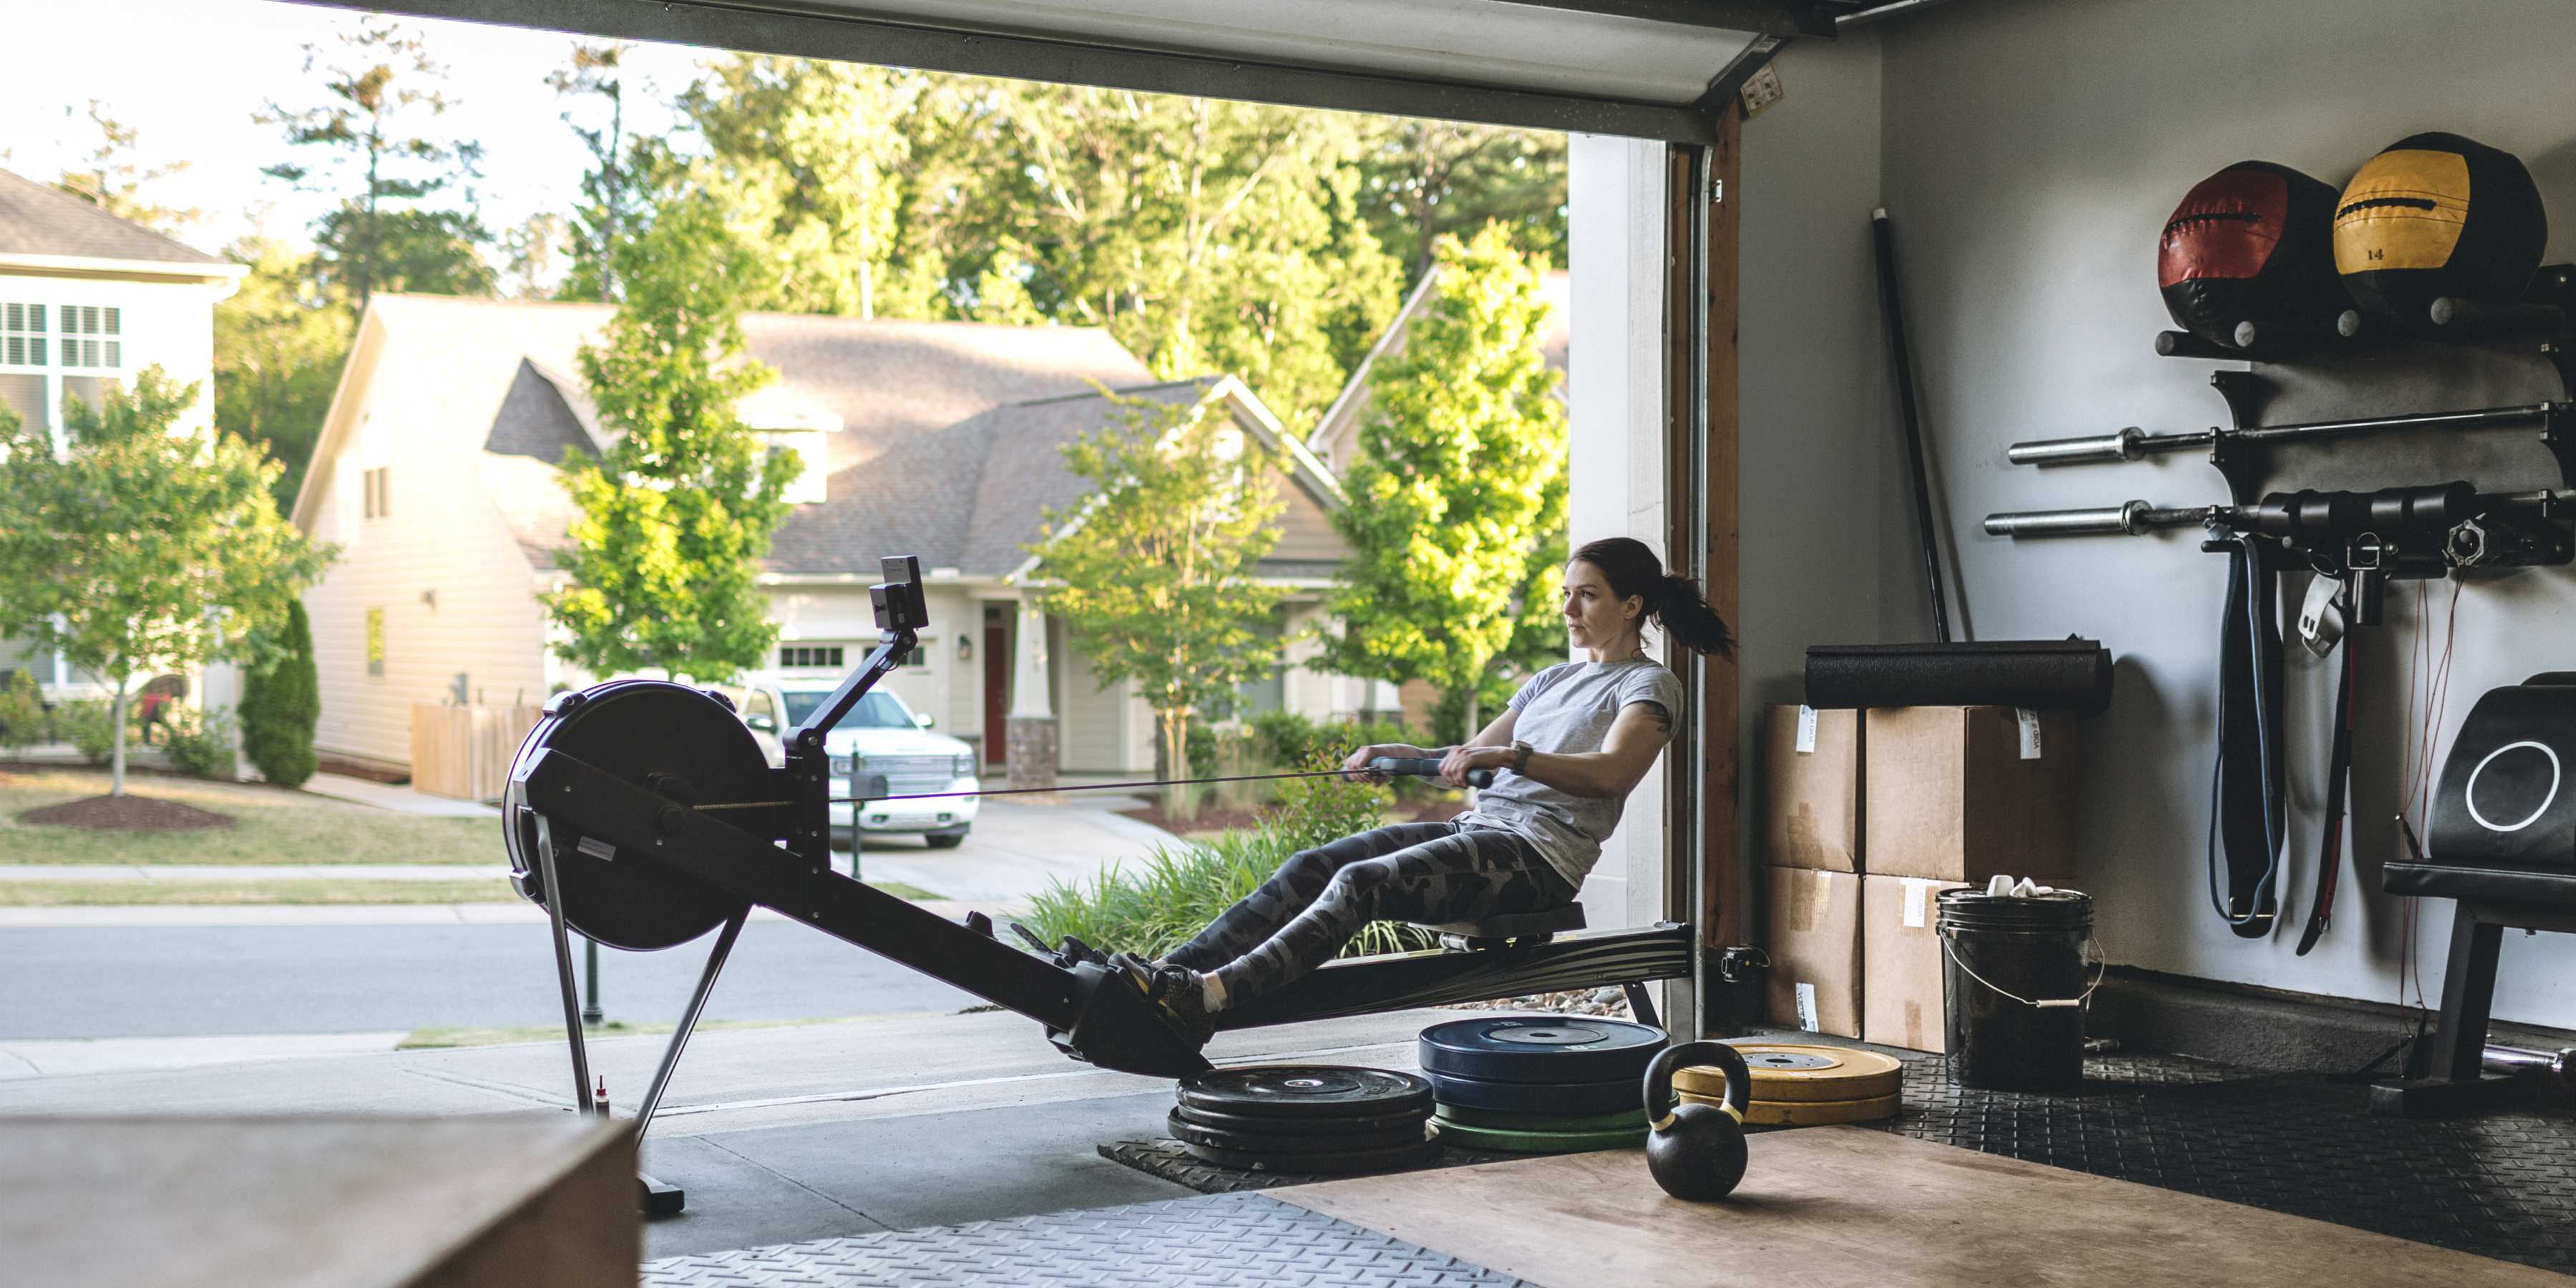 Image of a woman using a rowing machine at home